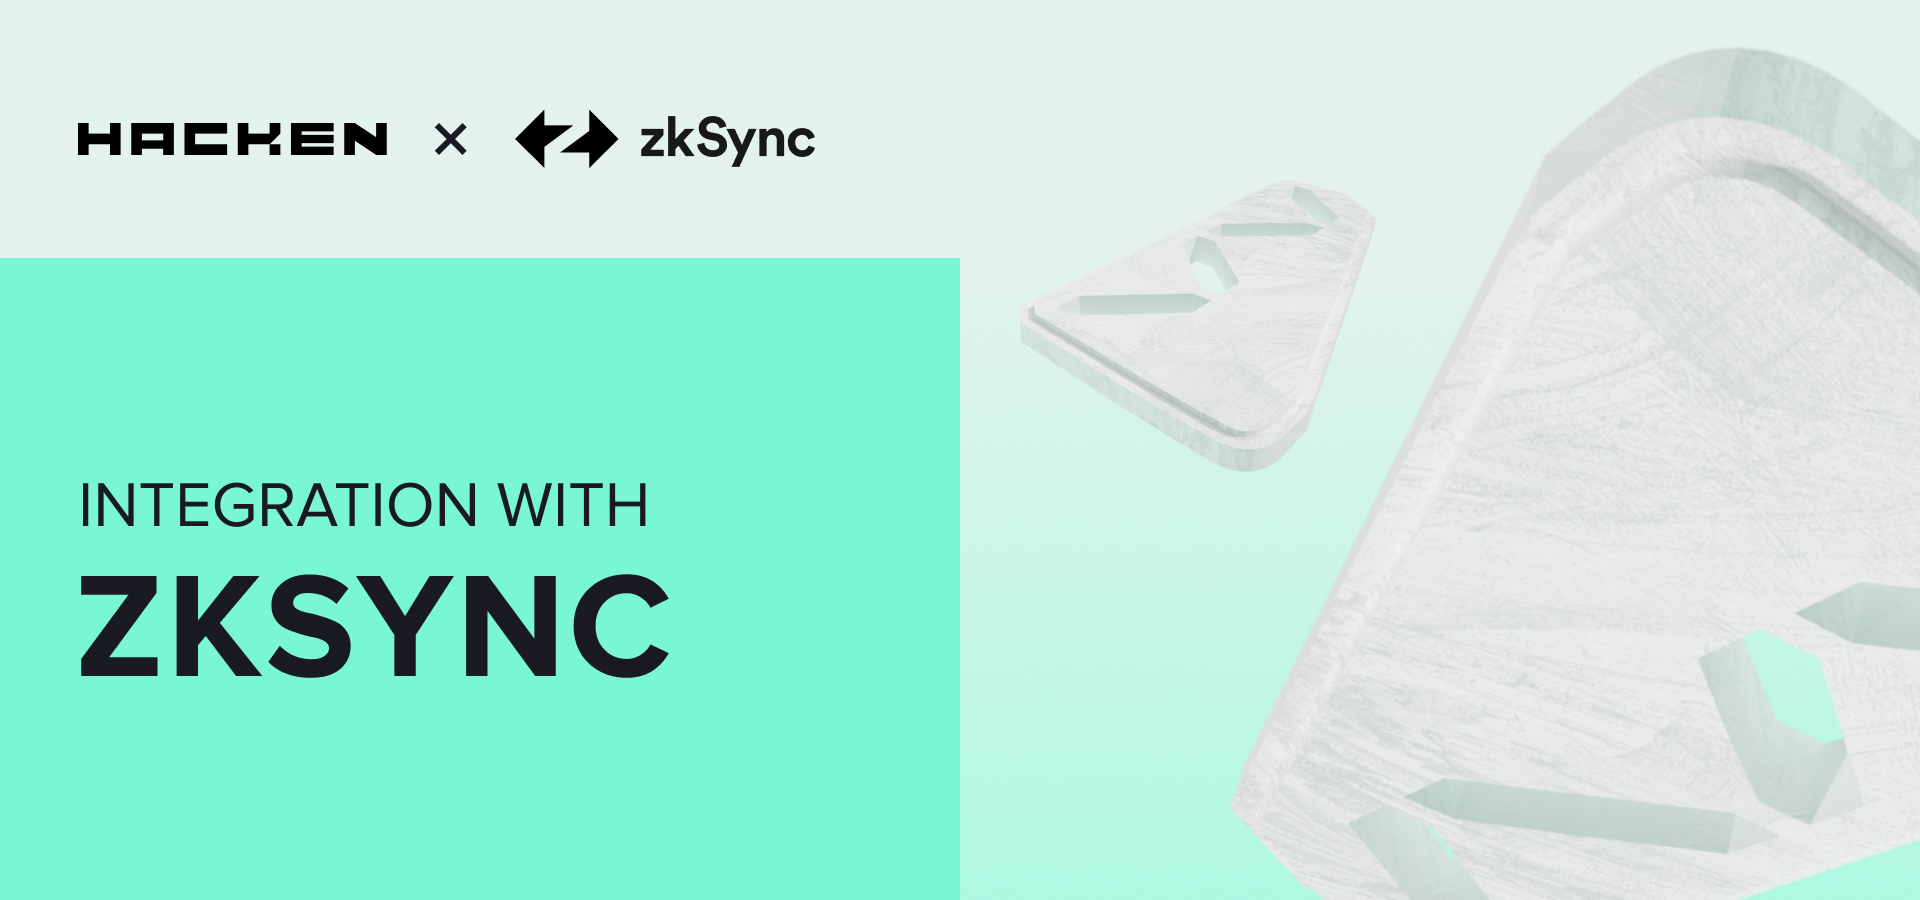 Announcing Integration with zkSync